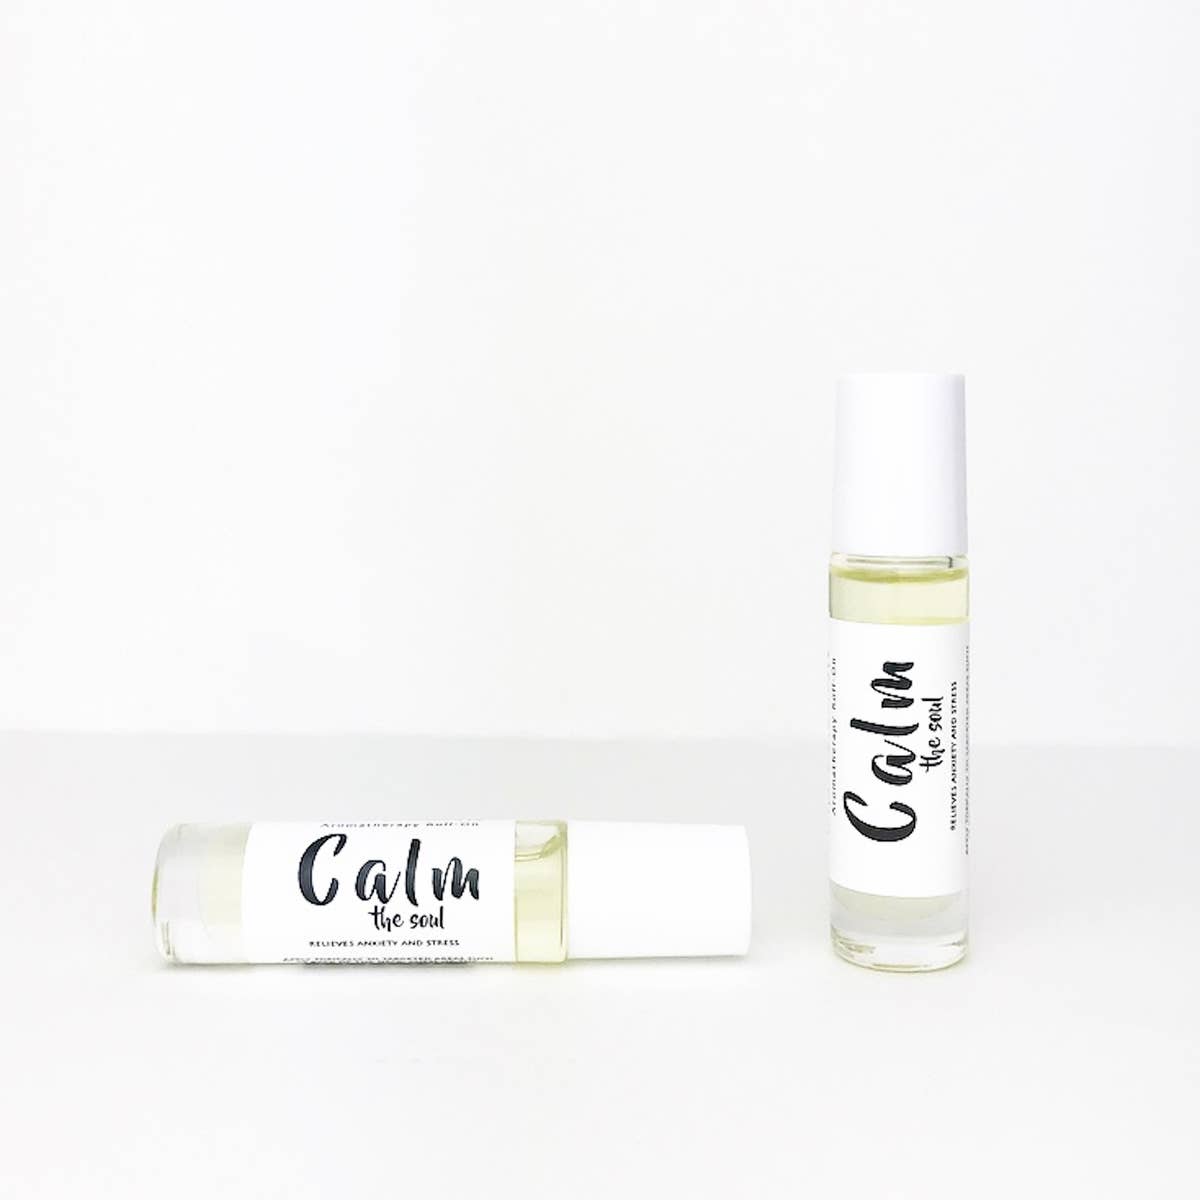 Two cylindrical bottles of Wild Botanicals Calm Aromatherapy Roll-On essential oils rest against a plain white background, one standing upright and the other lying horizontally, both featuring clean, simple labels.